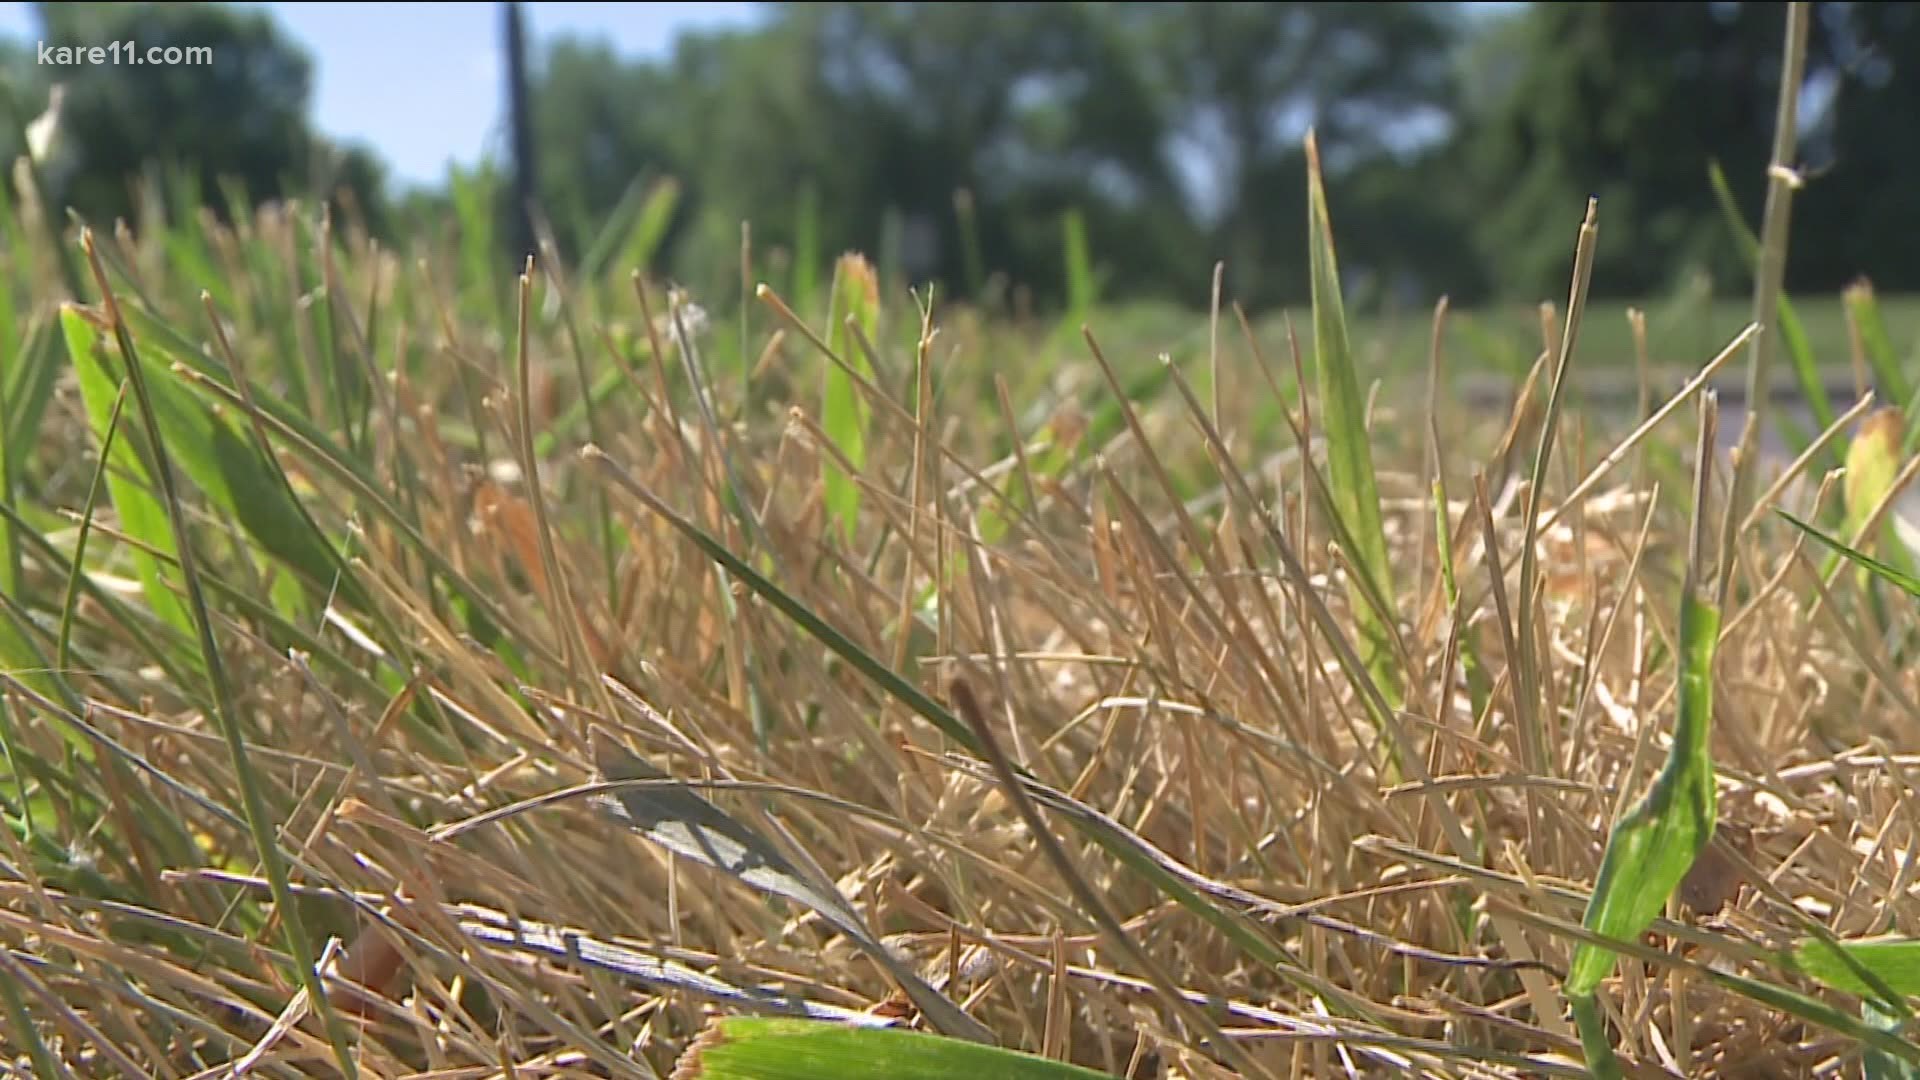 A press release says the City of Minneapolis will not put sprinkling conditions in place yet, but will put measures in place if the drought worsens.